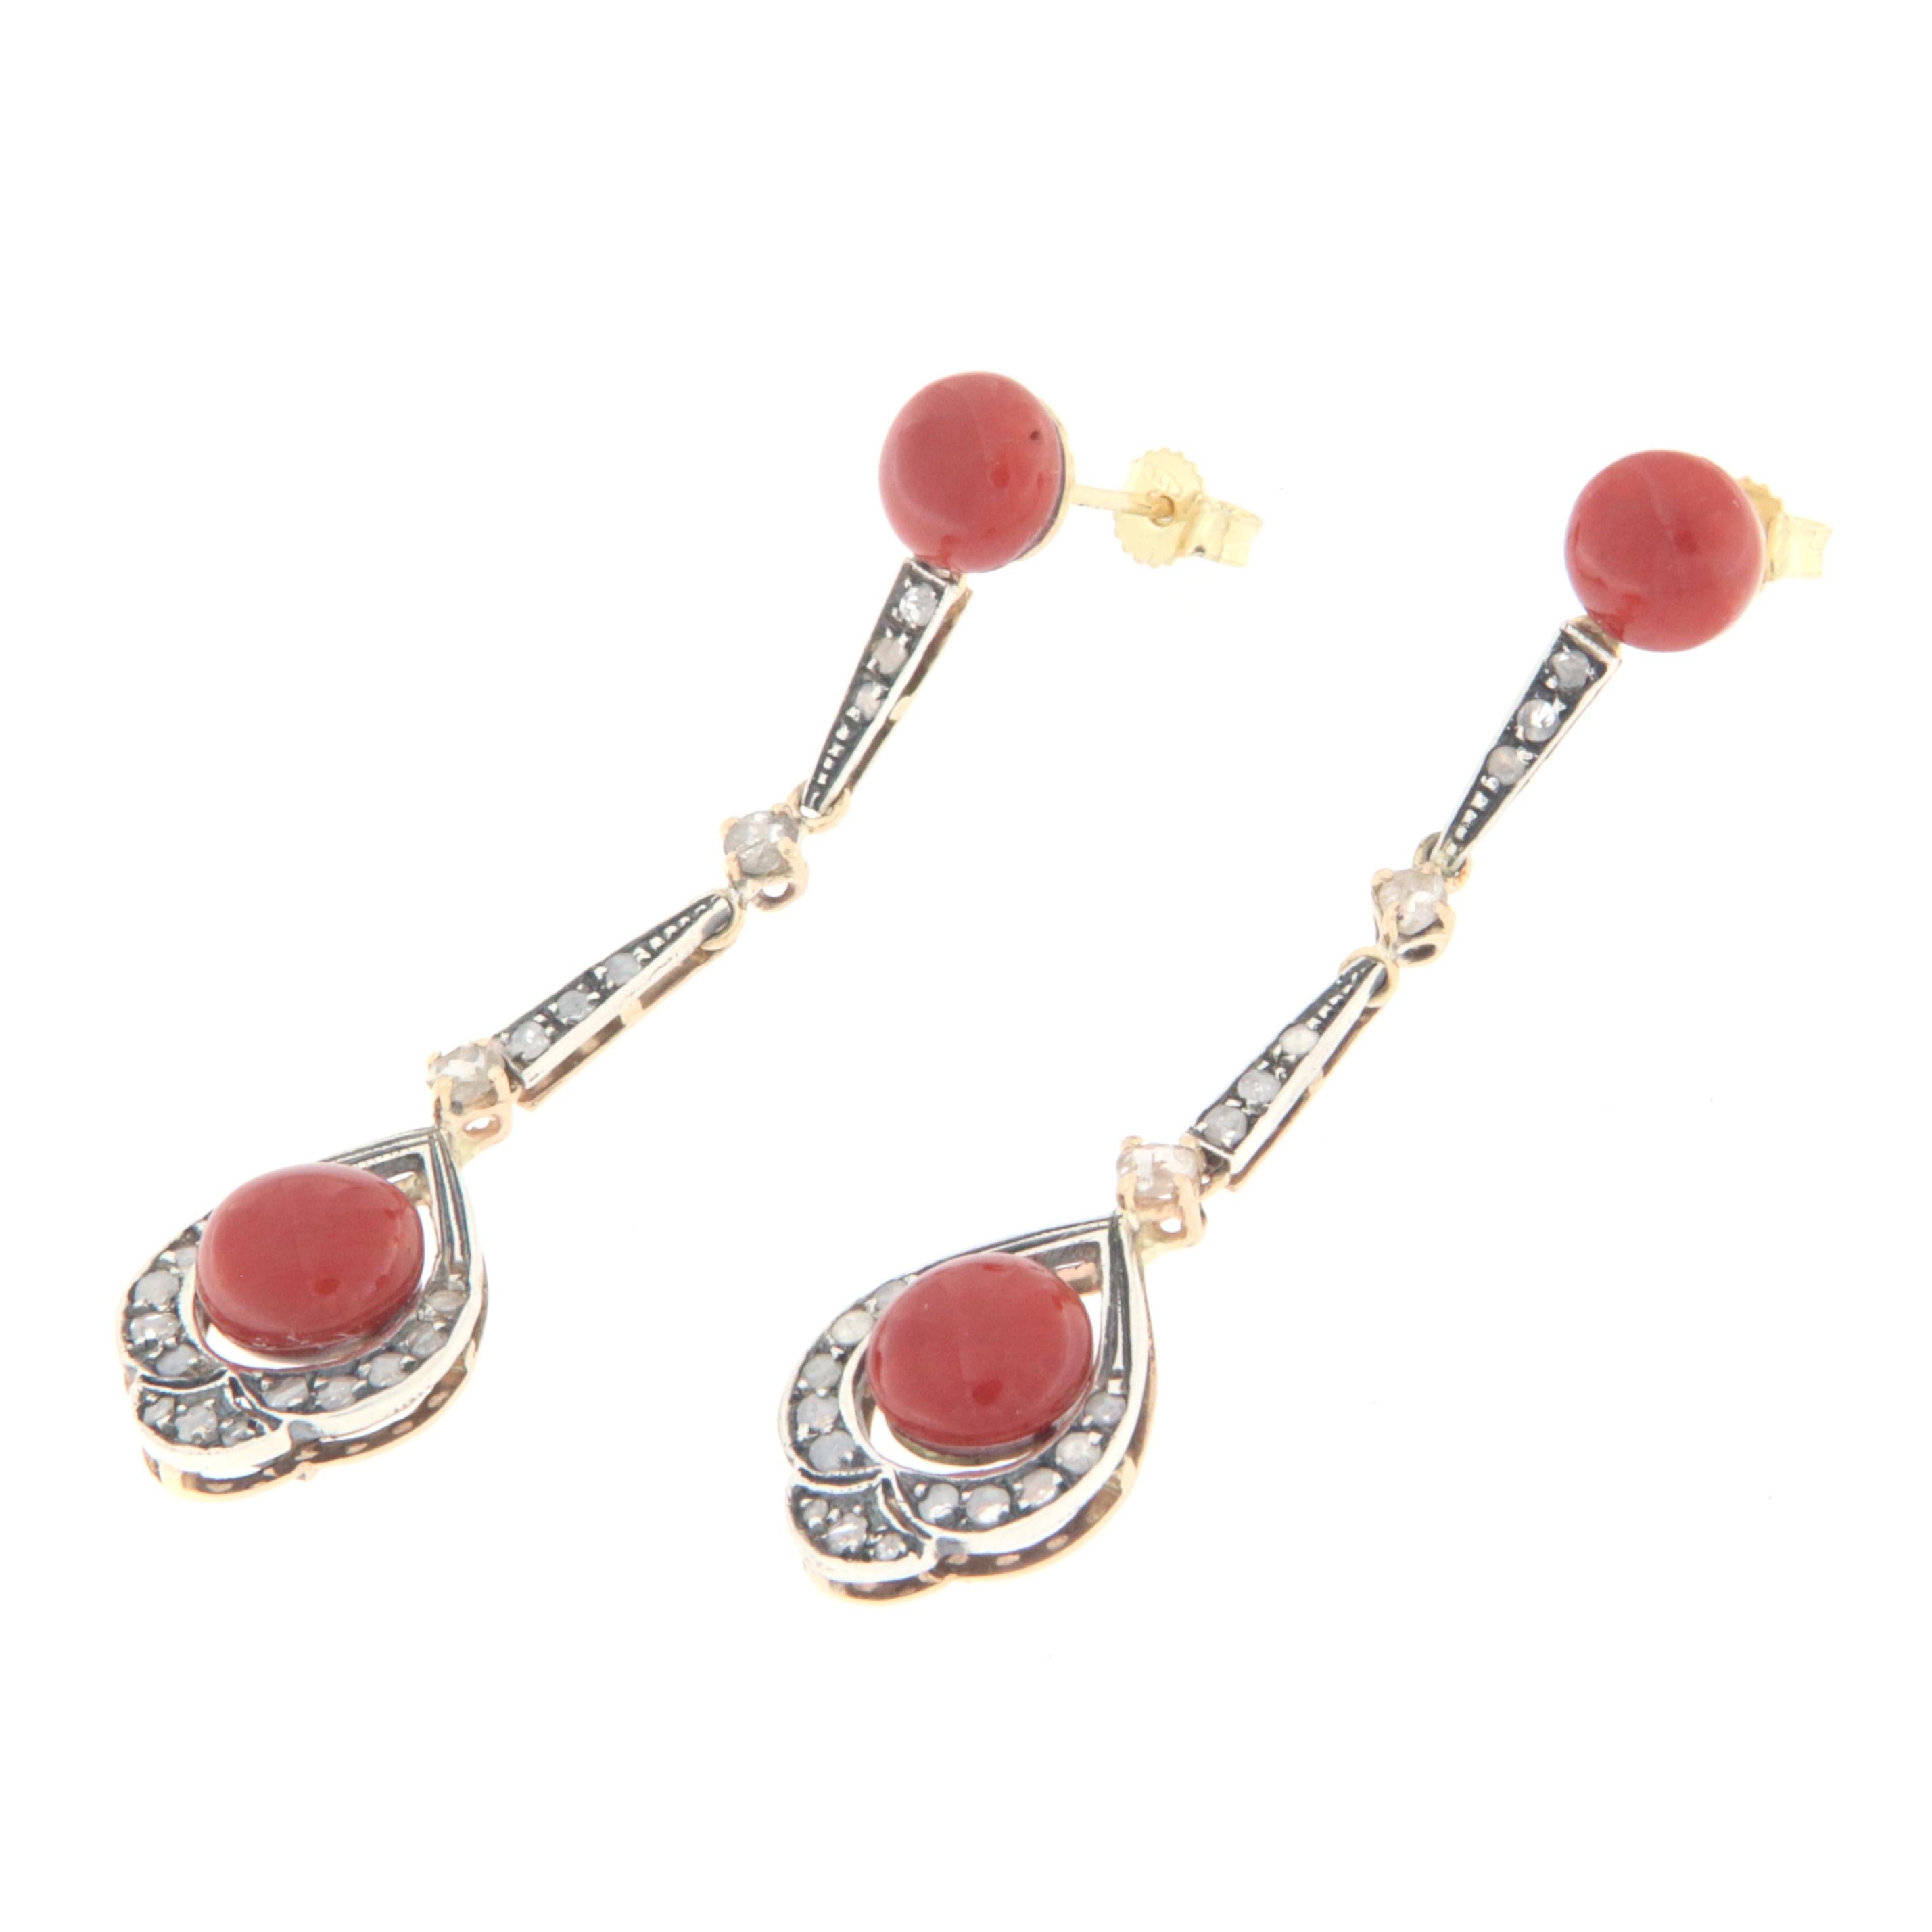 Amazing earrings in 14 karat yellow gold and 800 thousandths silver, 1950s style, Italian manufacture, mounted with old cut diamonds and Sardinian coral

Diamonds weight 0.73 karat
Coral weight 1.70 grams
Earrings total weight 8.50 grams